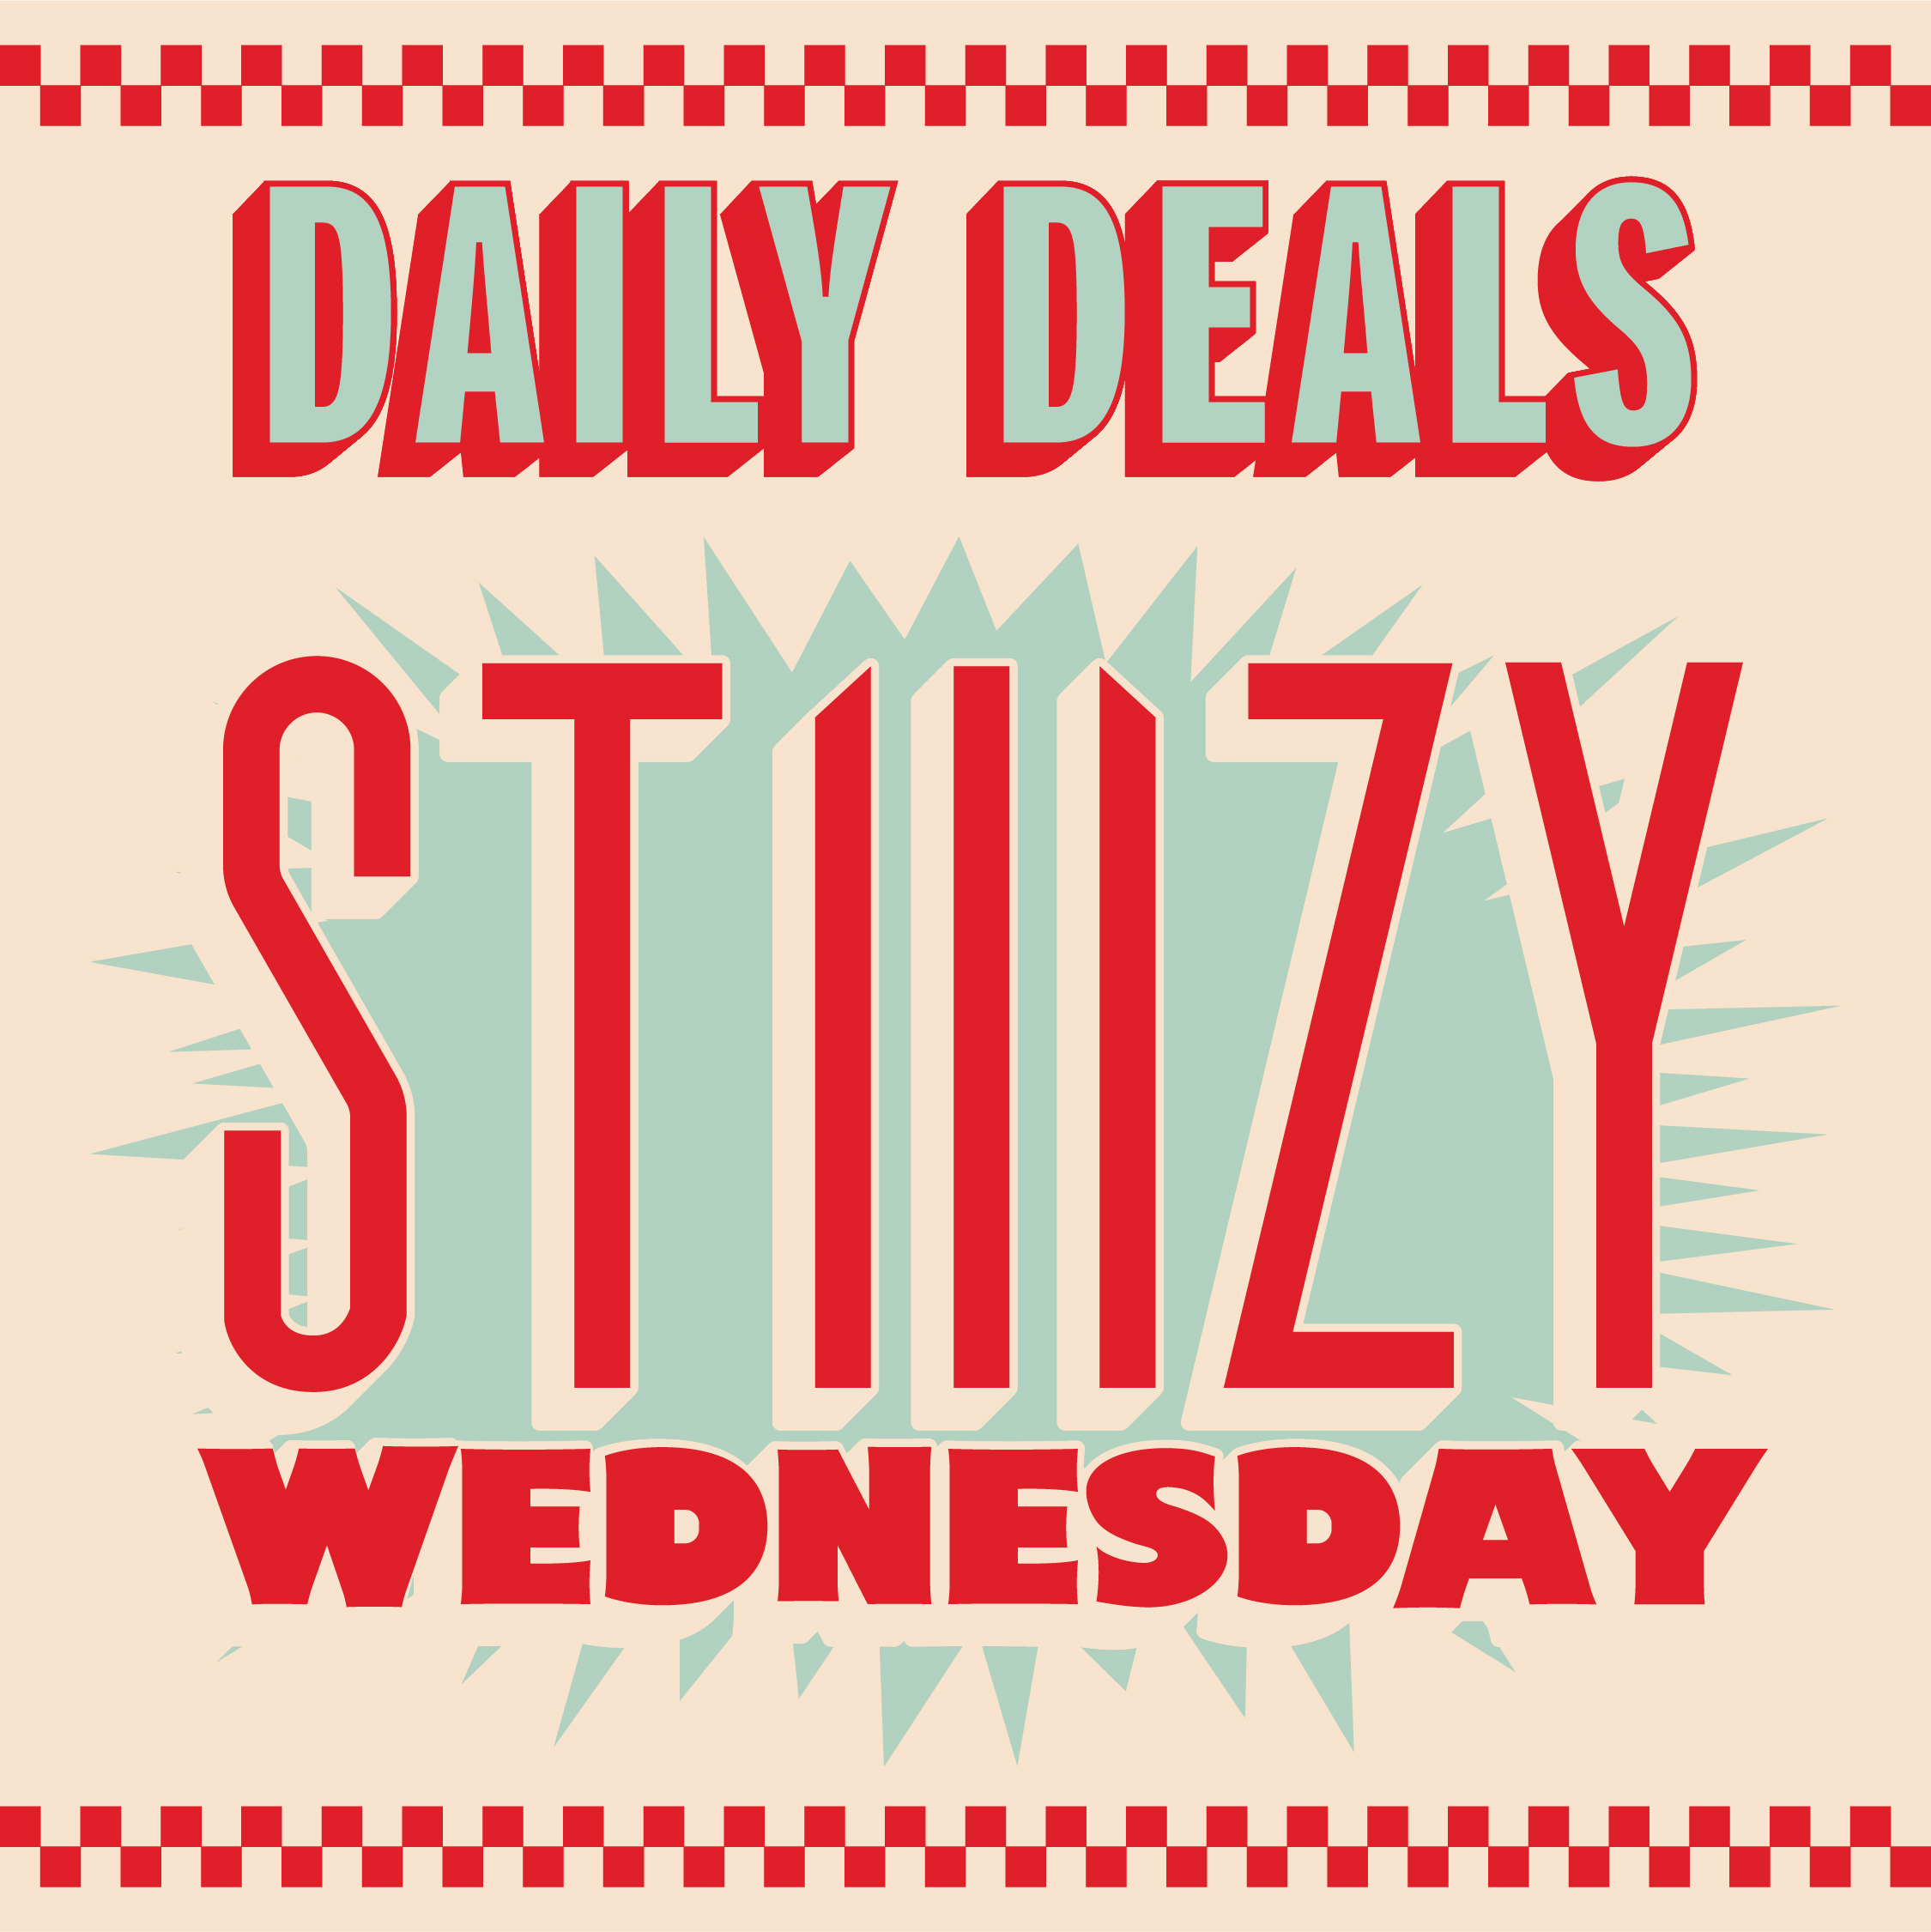 Daily Deals  Granite City Brewery